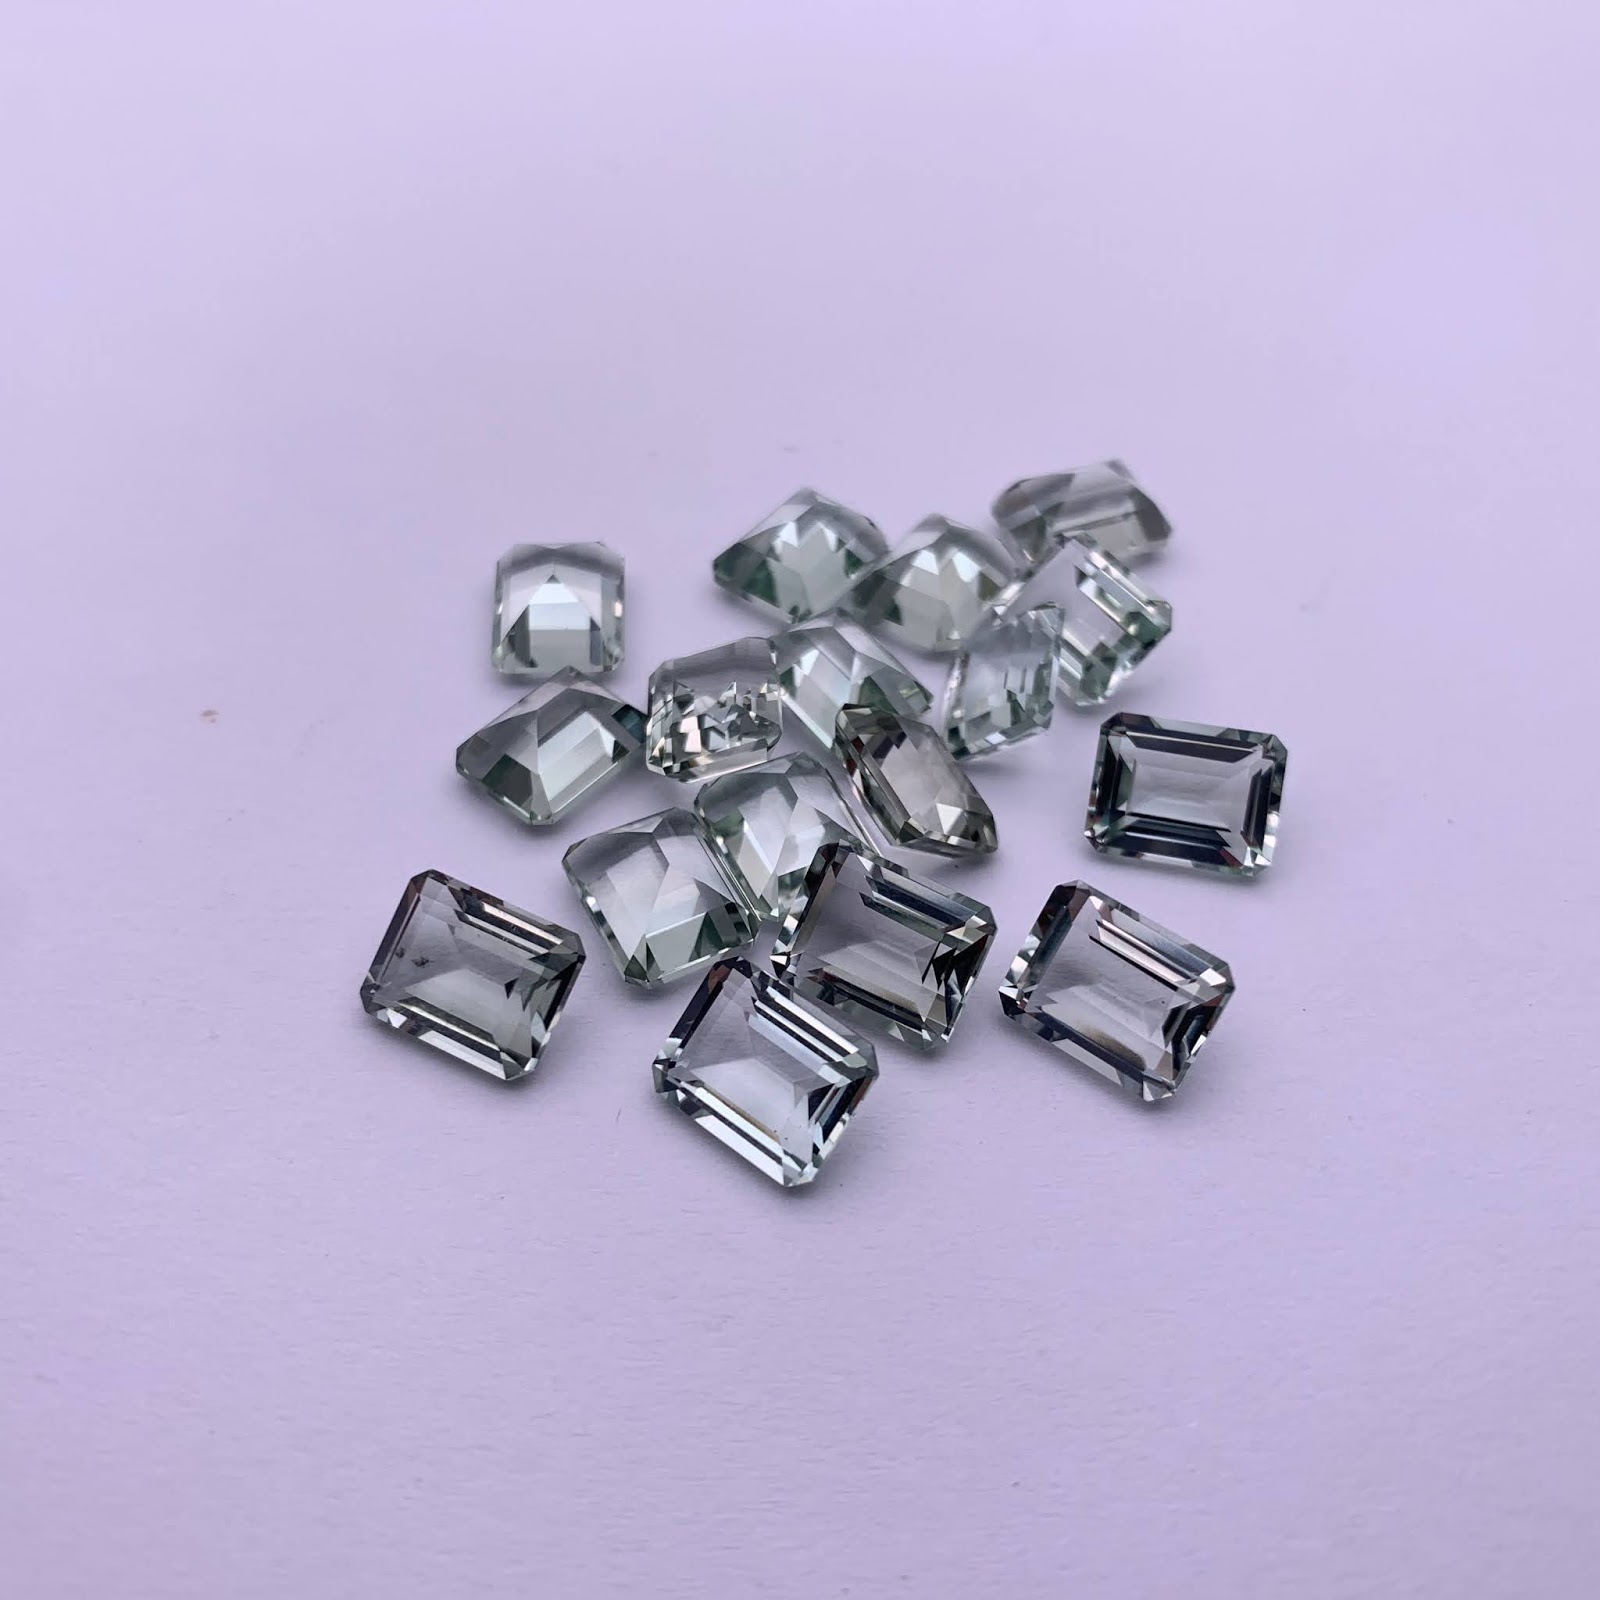 Loose prasiolite faceted gemstones wholesale from china supplier-FU RONG